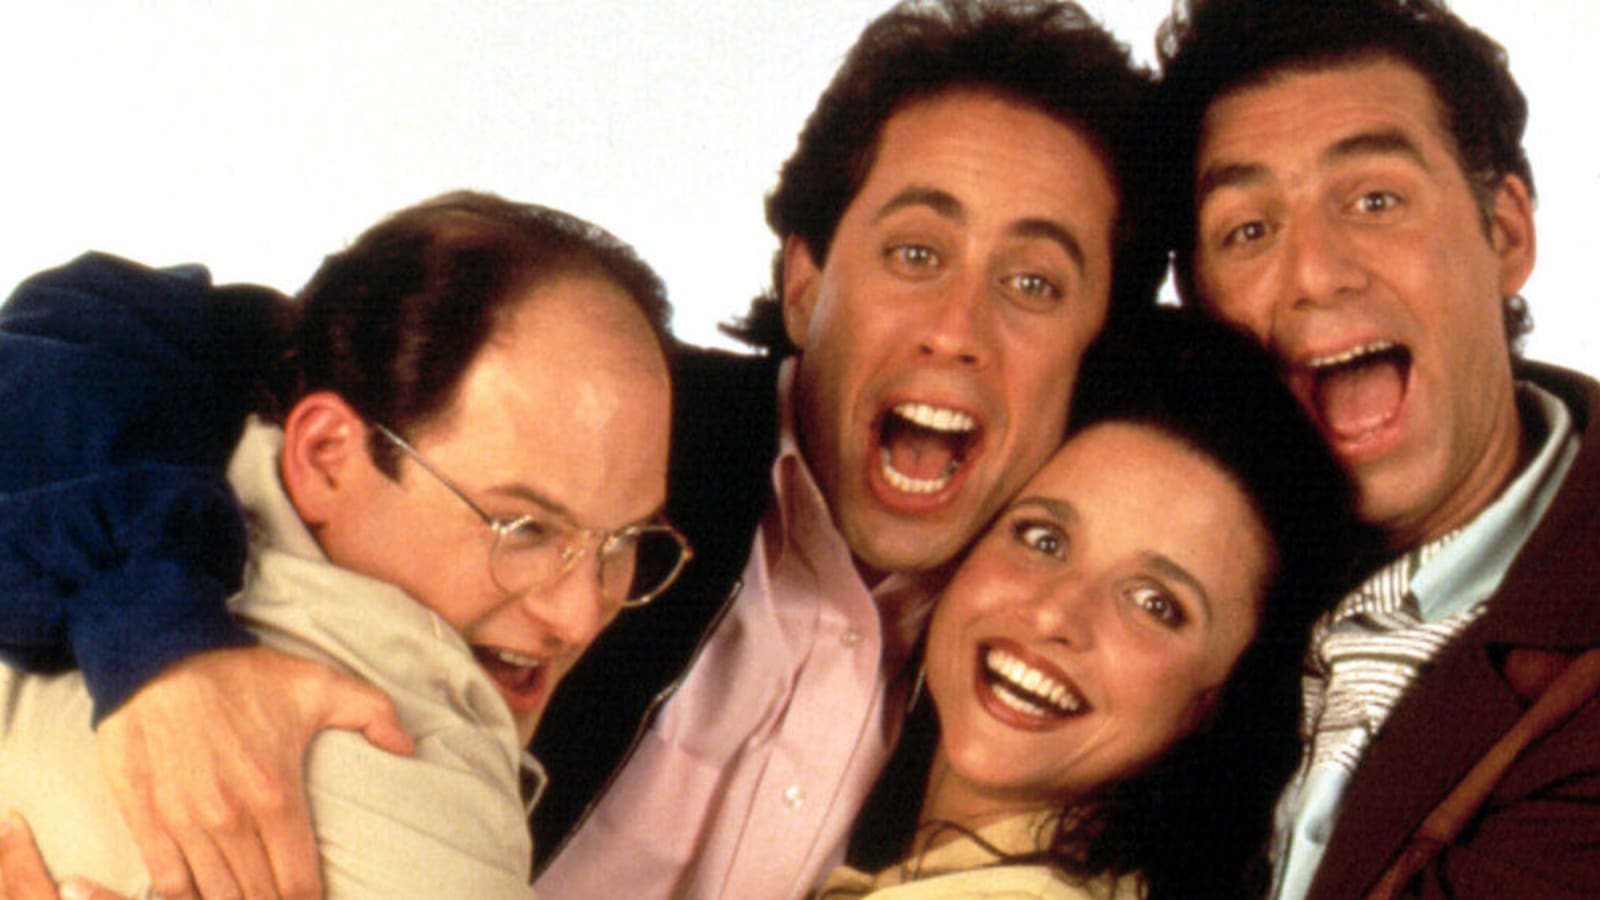 ‘Seinfeld’ ended 25 years ago: 10 best episodes, according to fans